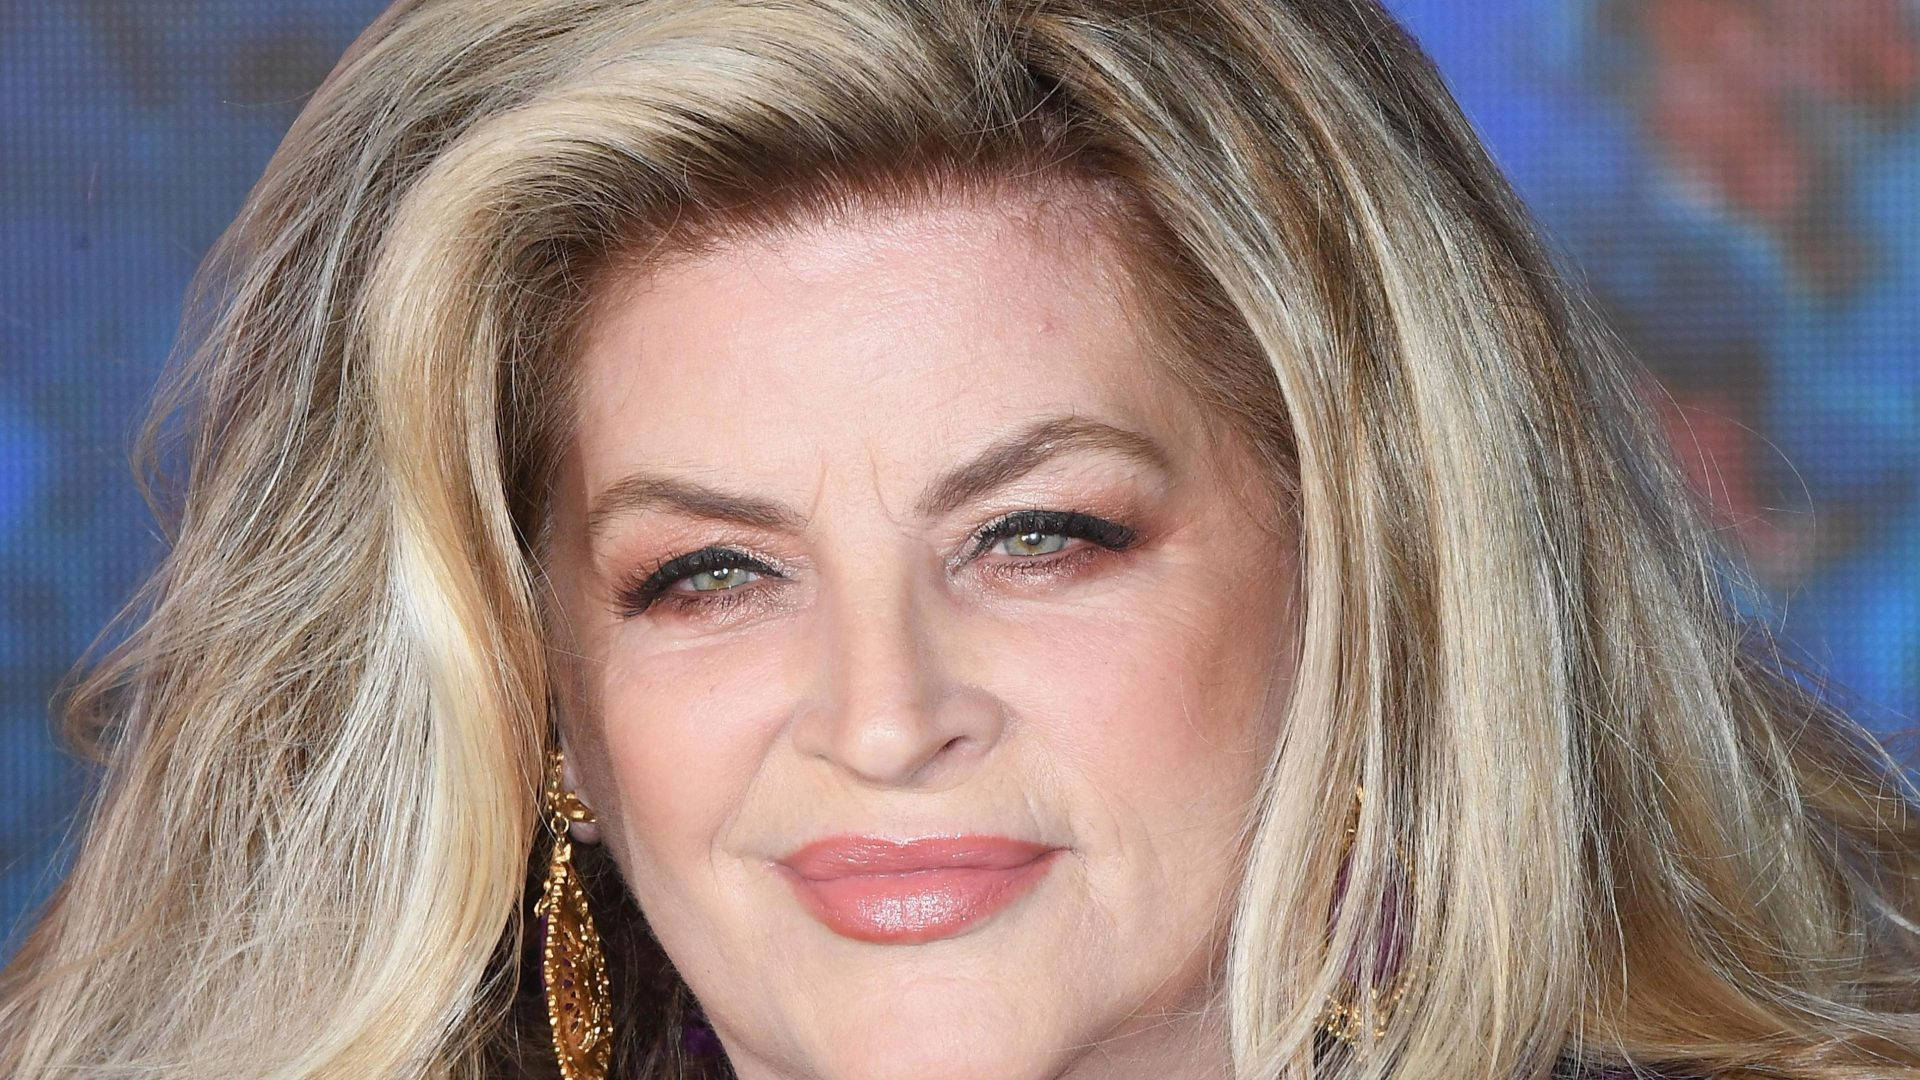 Kirstie Alley In Celebrity Big Brother 2018 Launch Picture